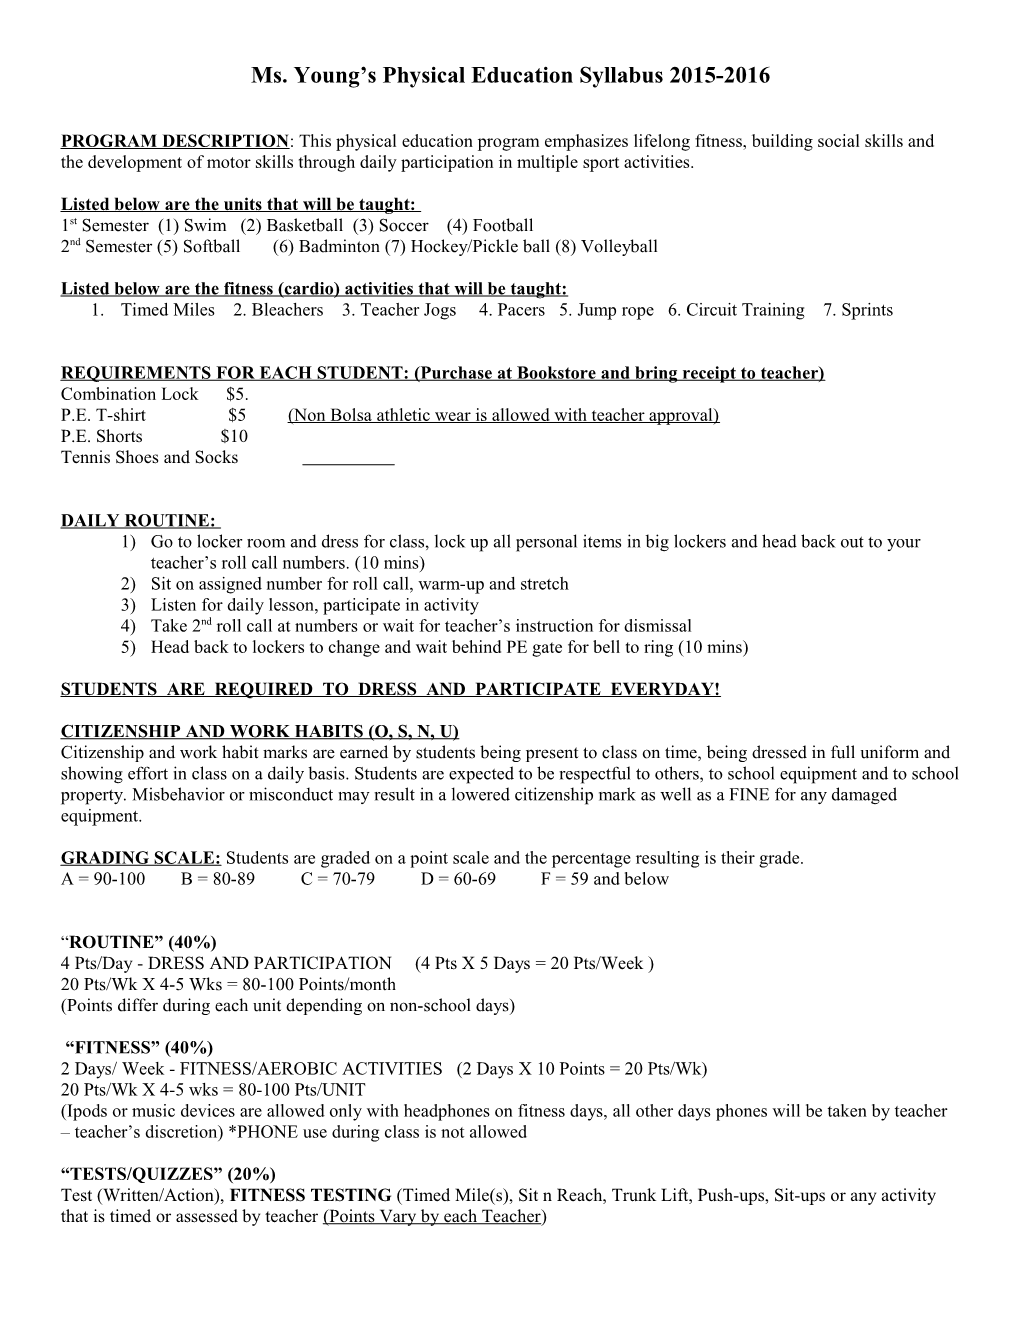 Ms. Young S Physical Education Syllabus 2015-2016